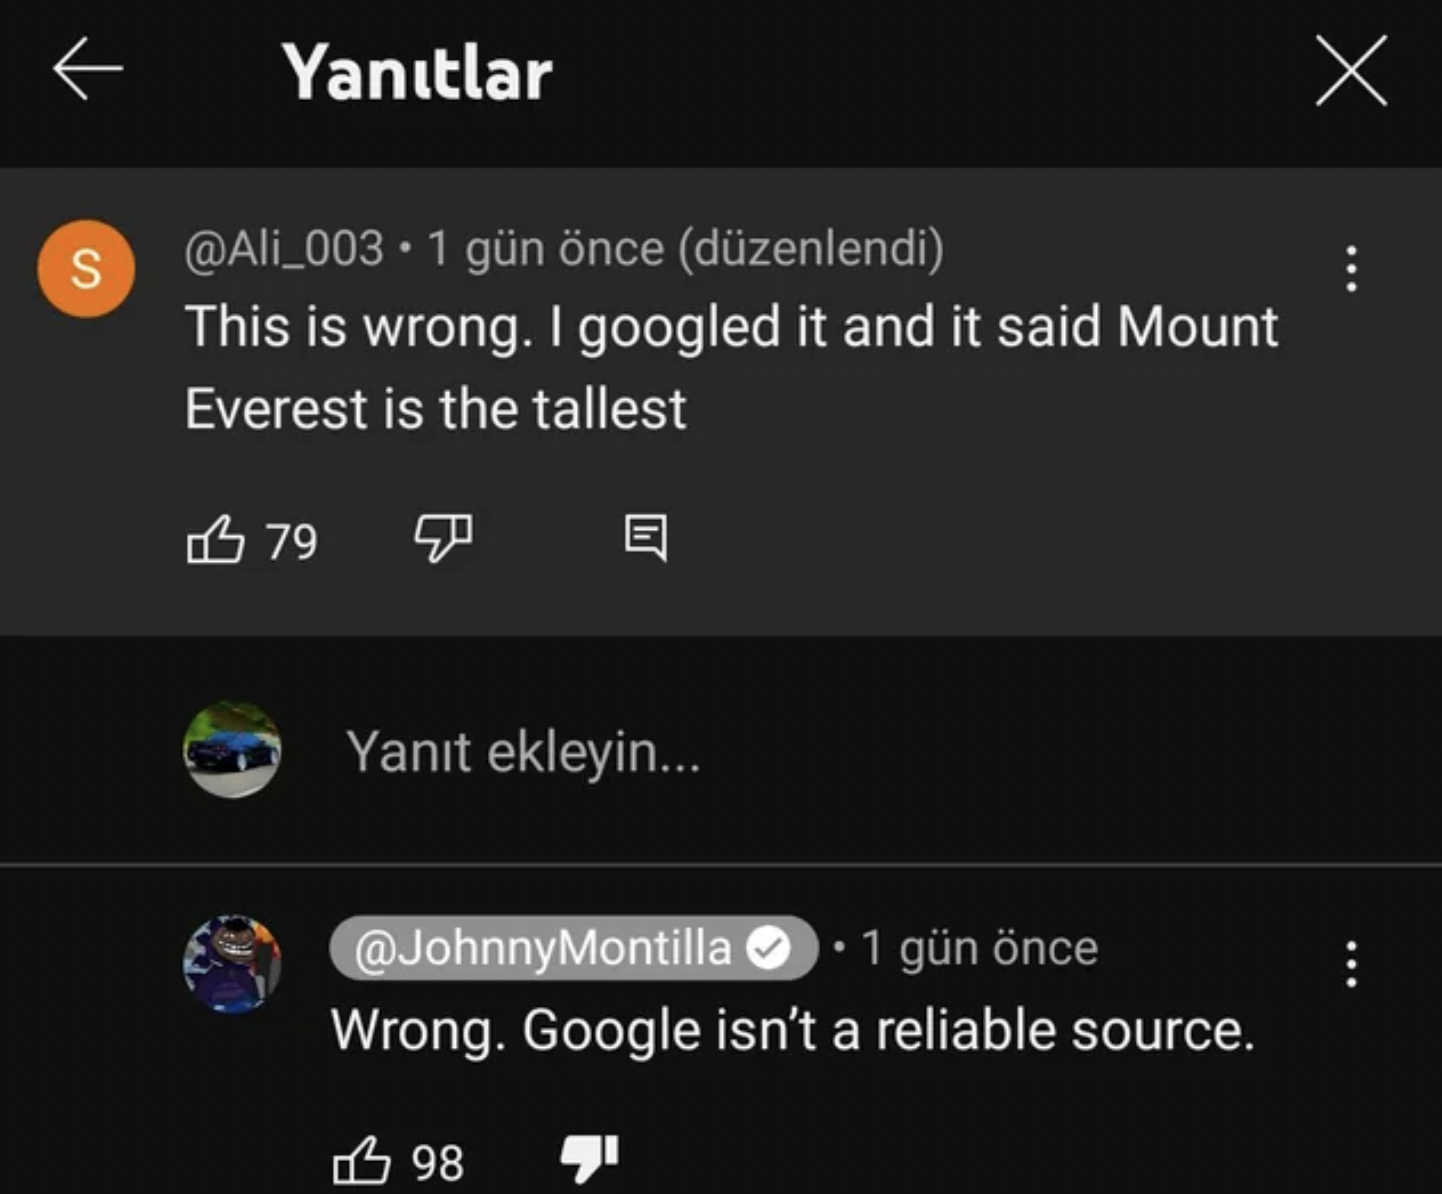 screenshot - S Yantlar . 1 gn nce dzenlendi This is wrong. I googled it and it said Mount Everest is the tallest 79 Yant ekleyin... 1 gn nce Wrong. Google isn't a reliable source. 98 71 x